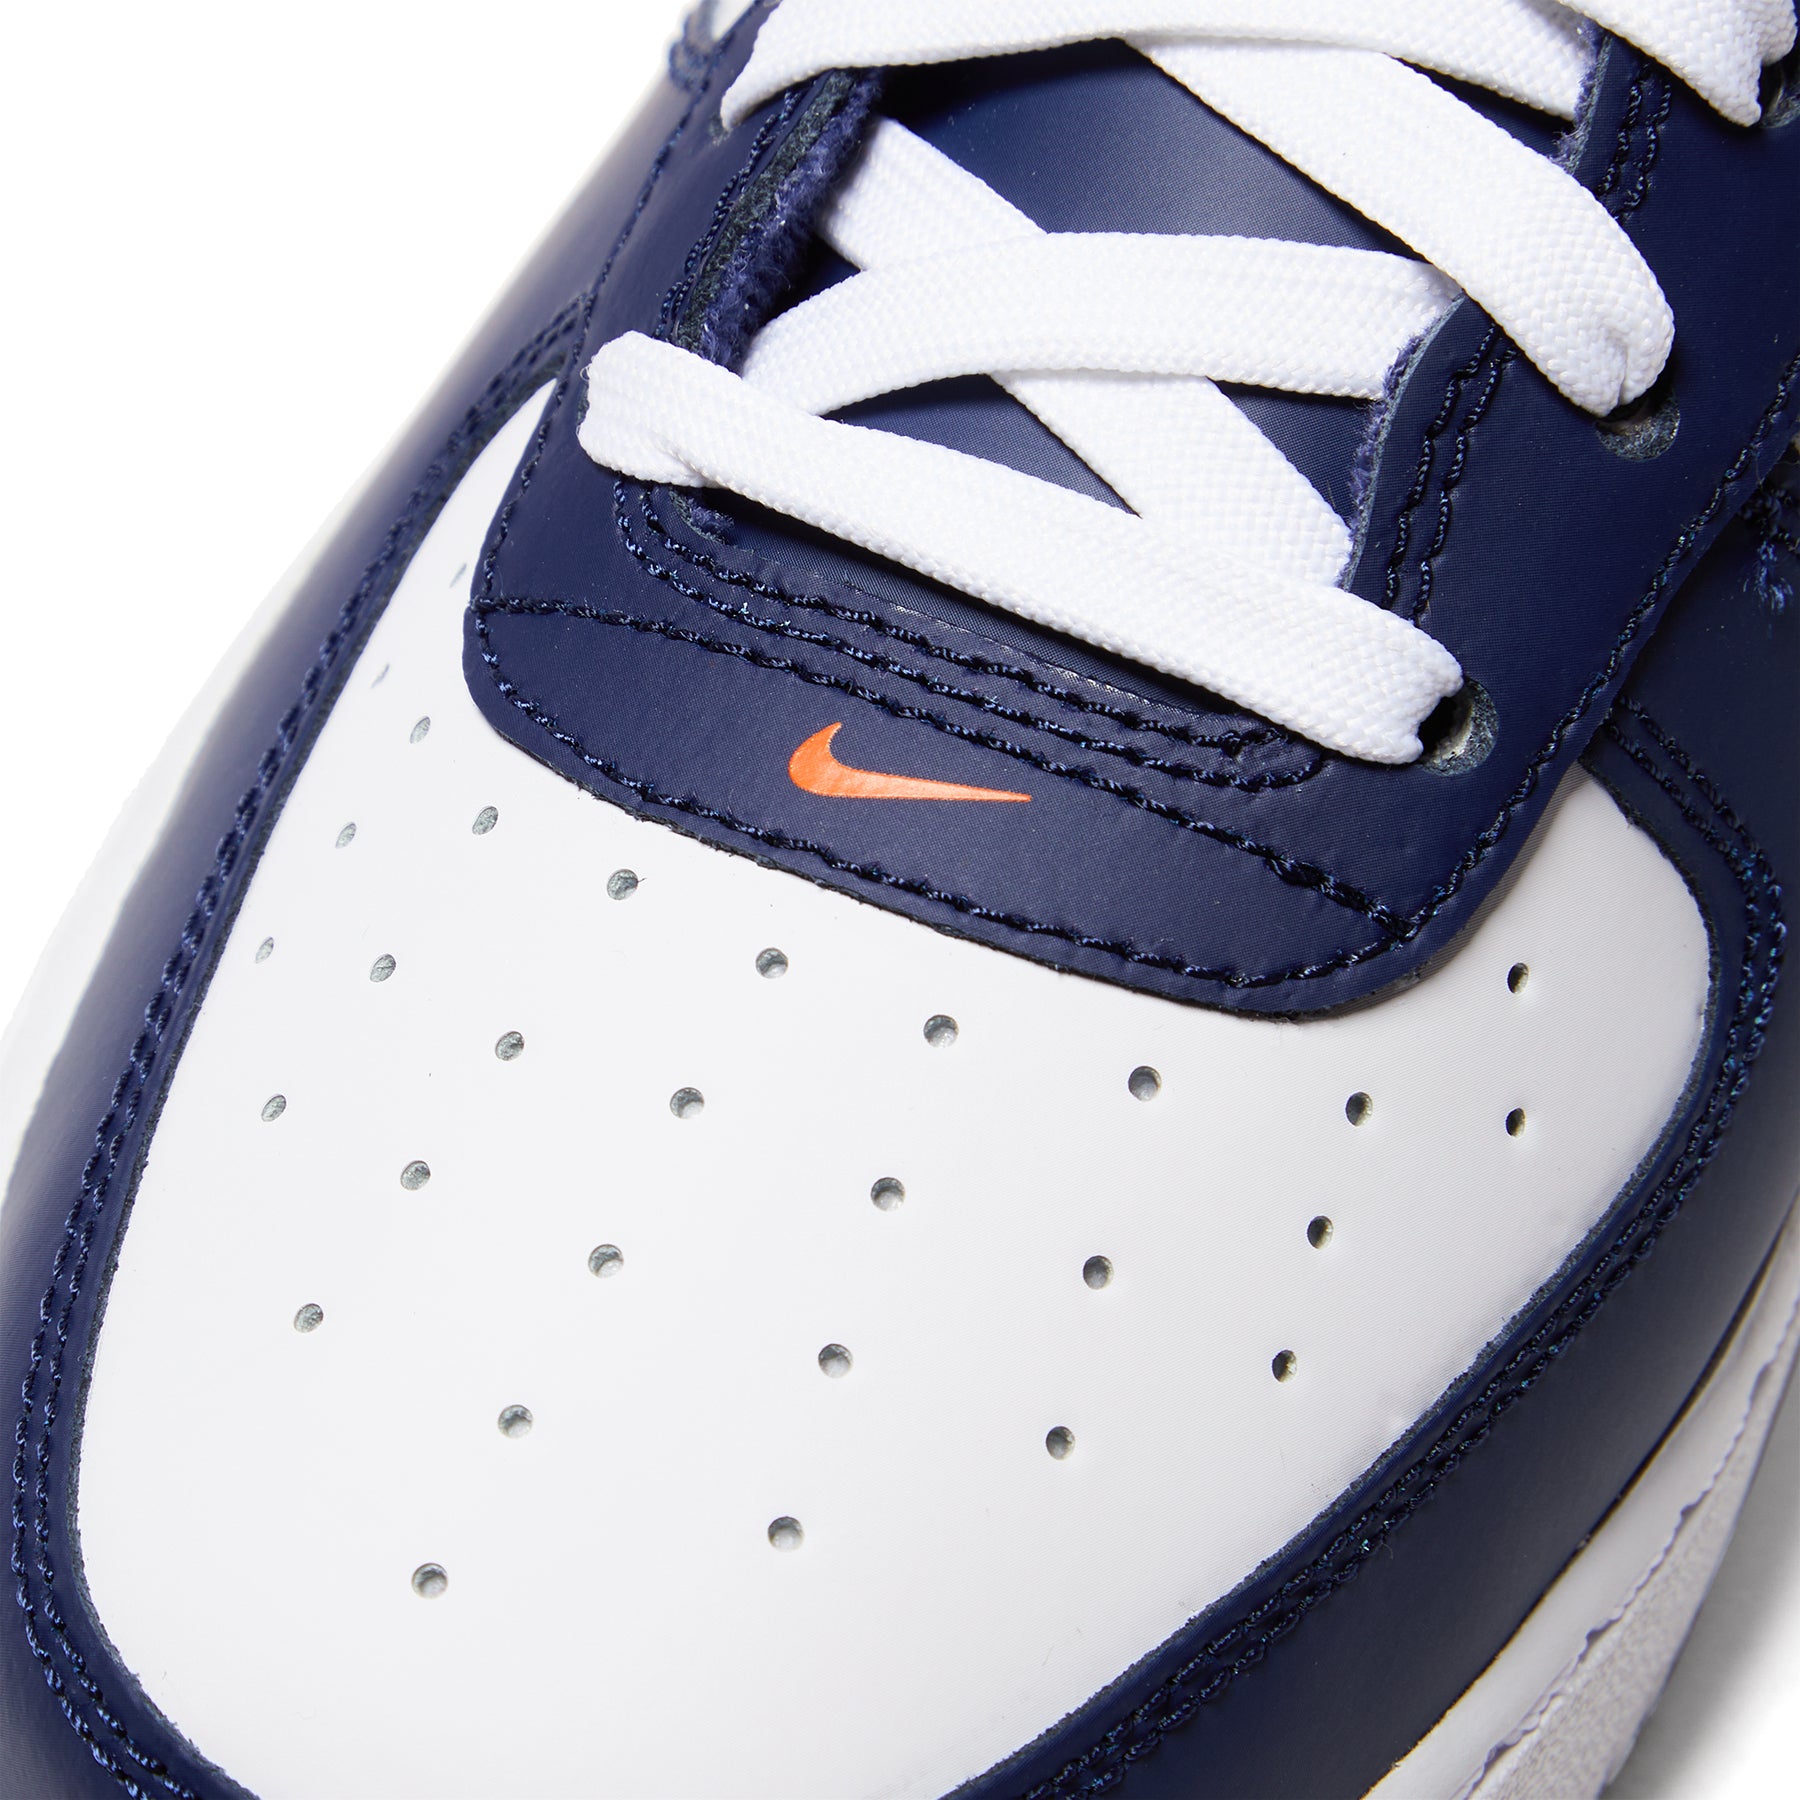 Nike Air Force 1 Low LV8 GS (Midnight Navy/White/Blue Tint